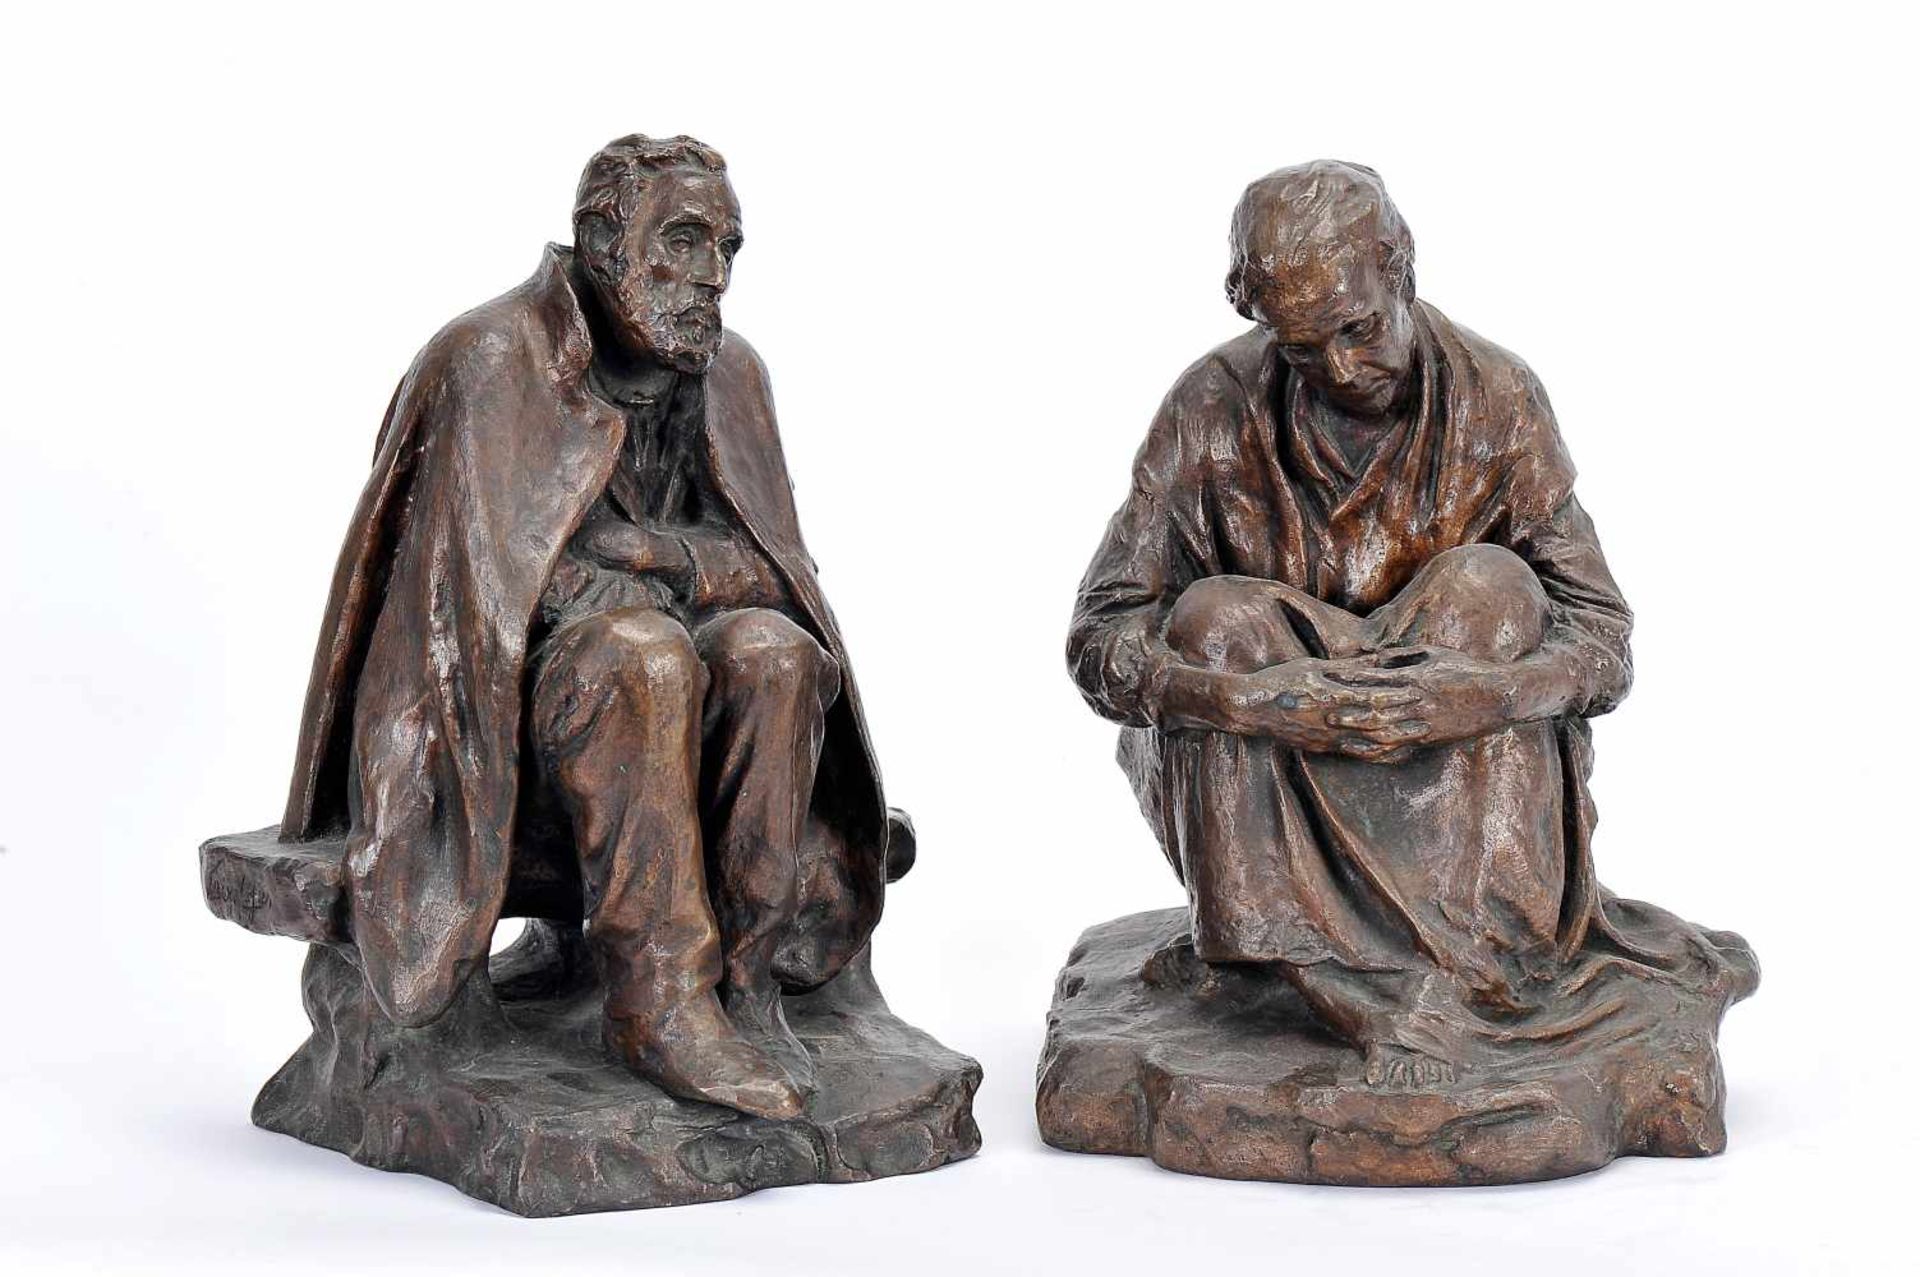 ANTÓNIO TEIXEIRA LOPES - 1866-1942, Elders, a pair of bronze sculptures, signed, one dated 1911,